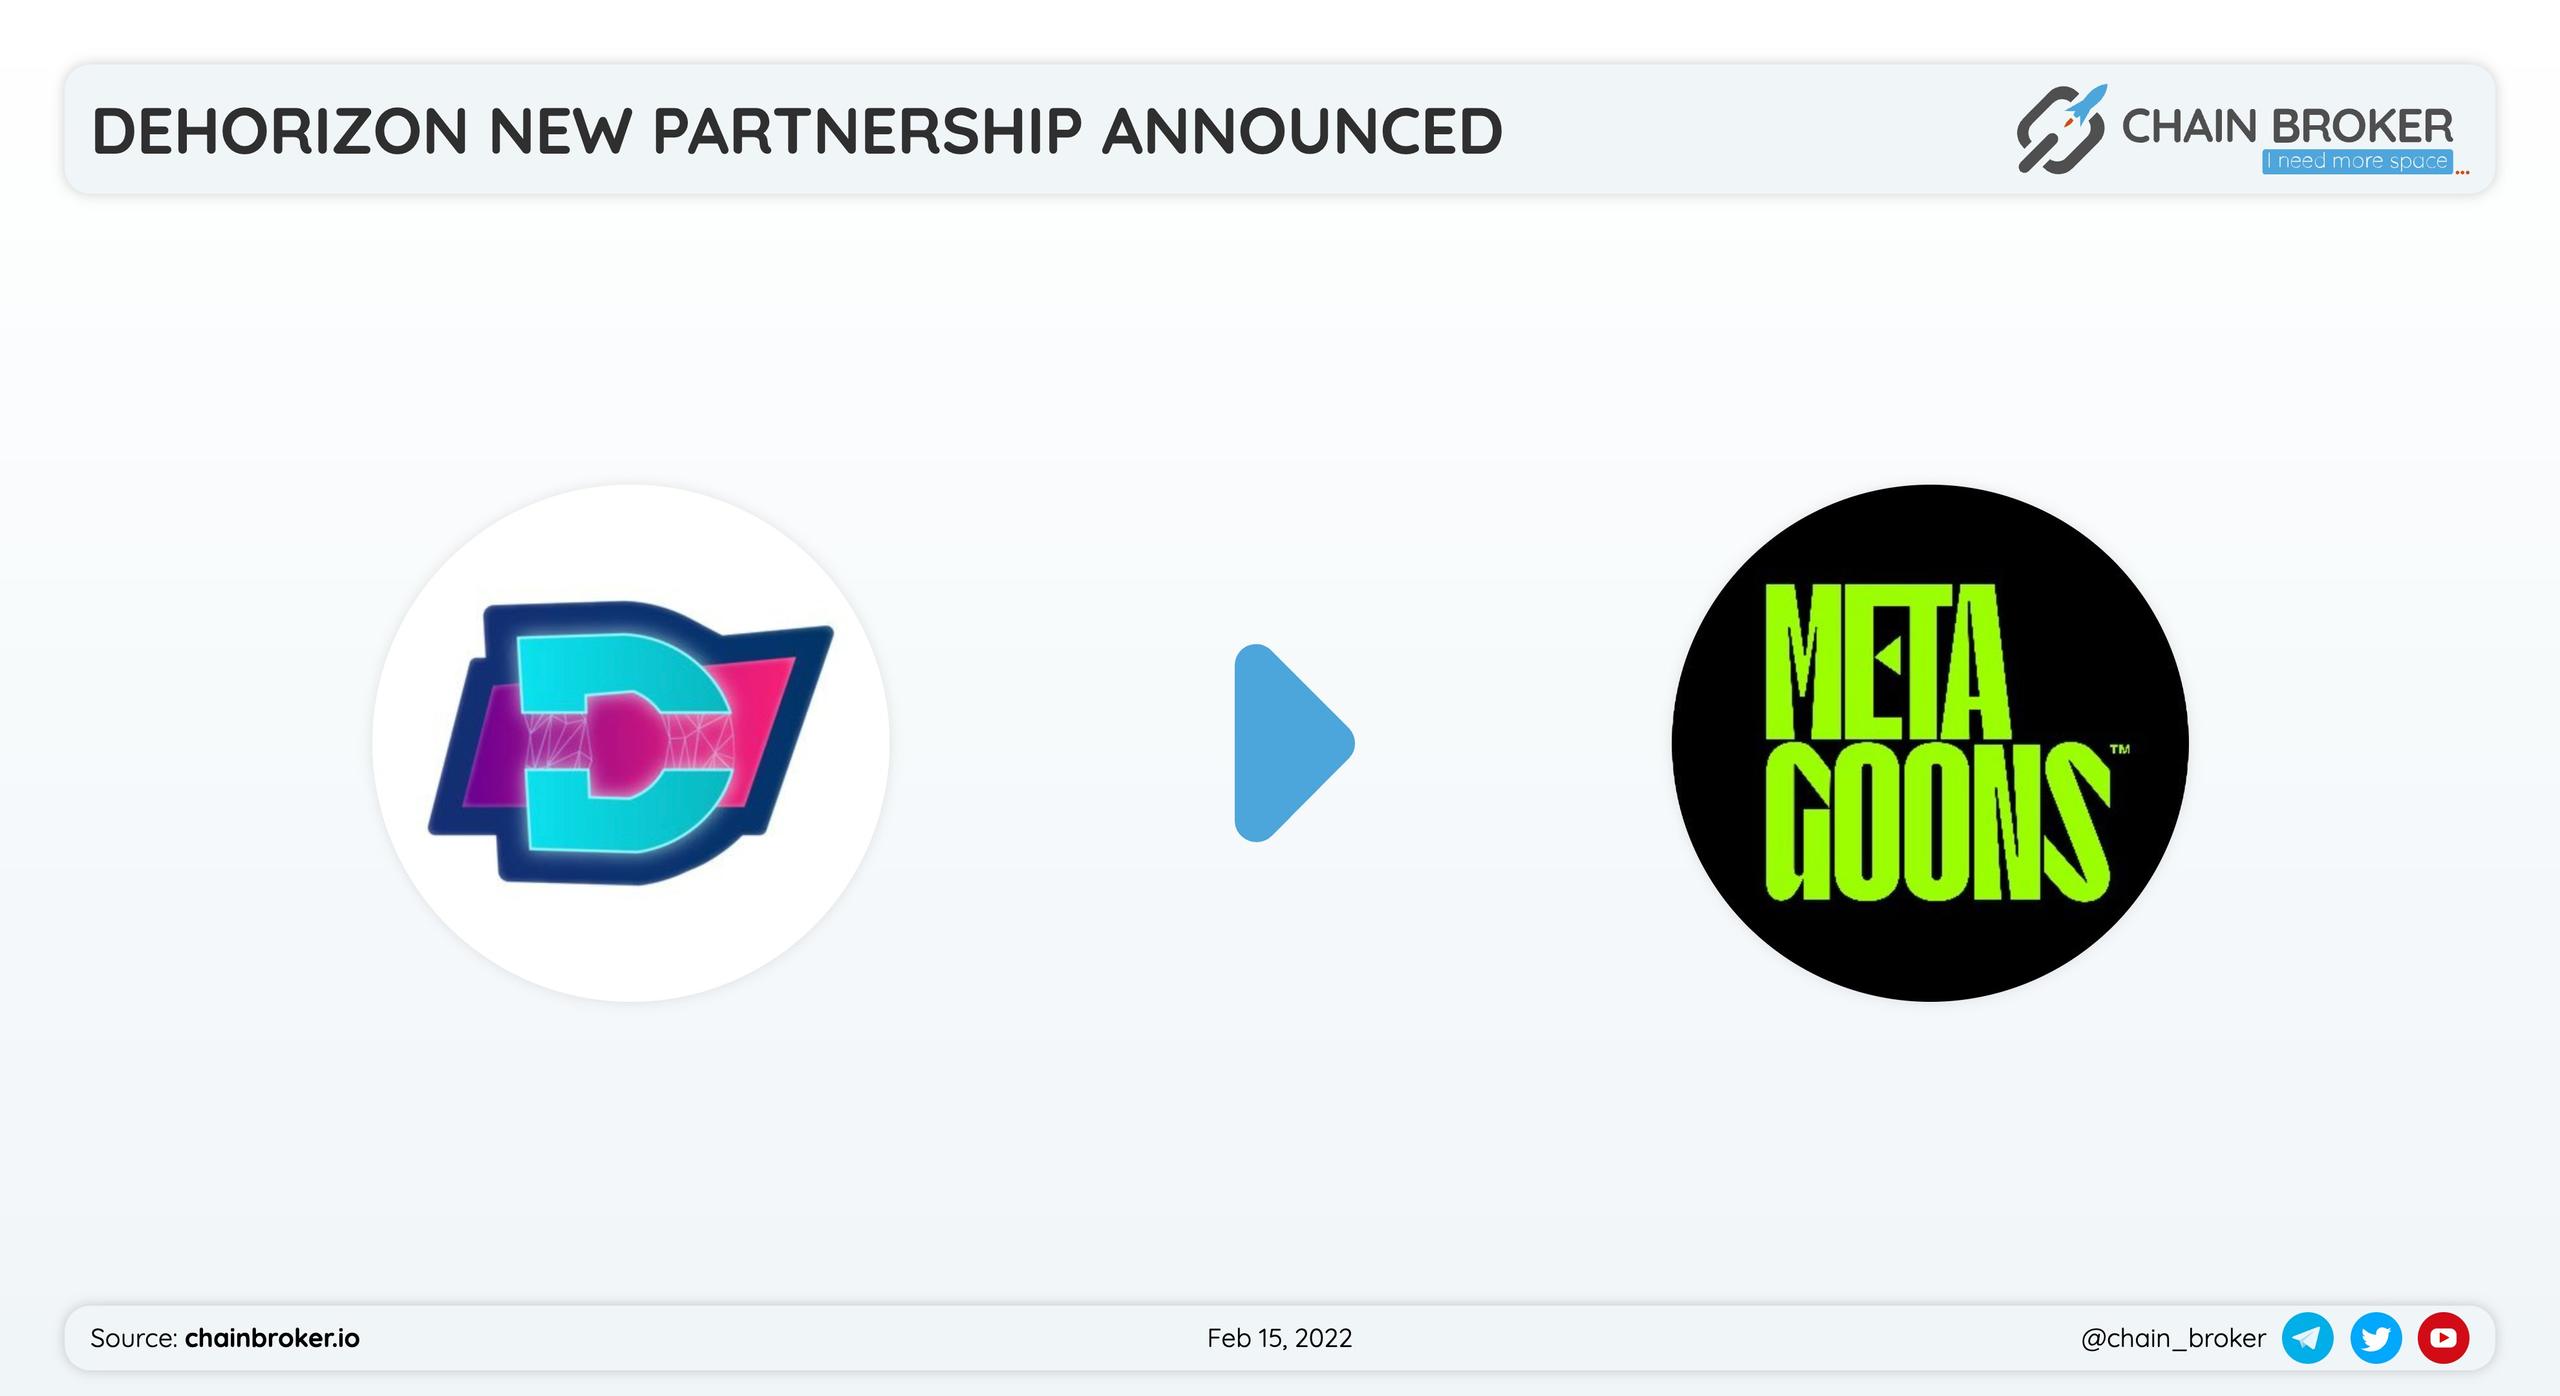 DeHorizon $DEVT has partnered with MetaGoon for a productive partnership.